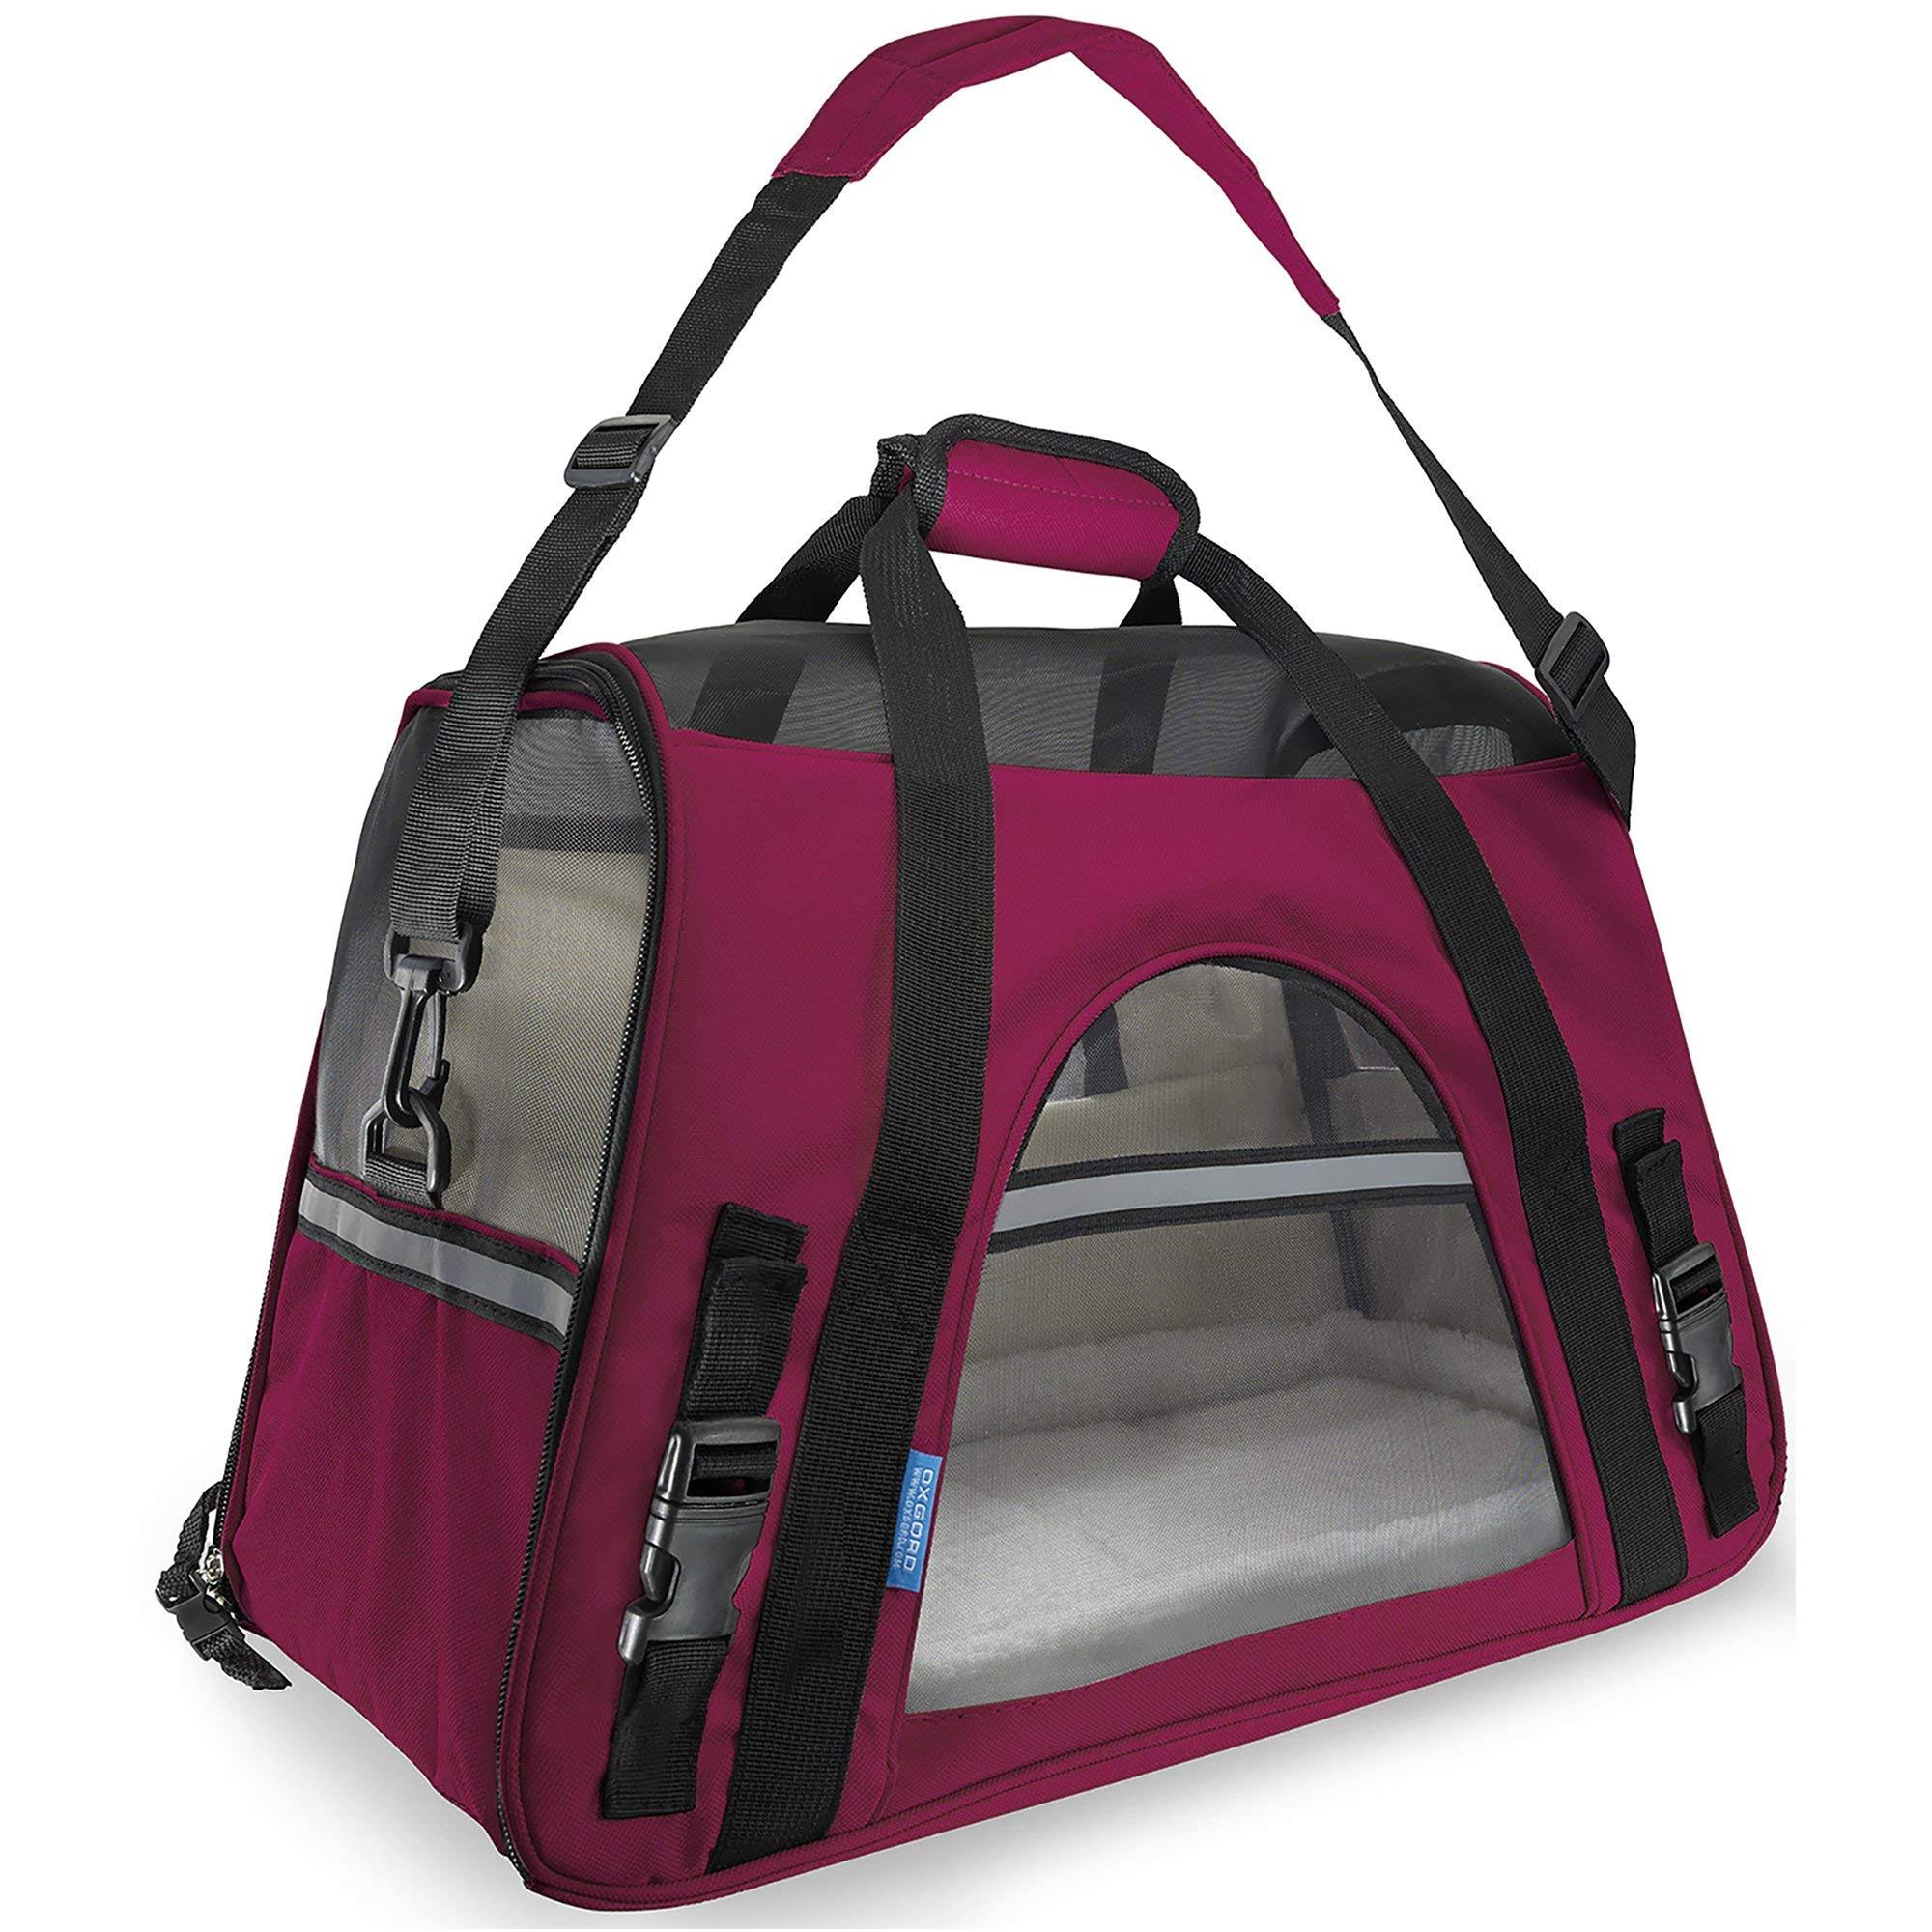 Paws and Pals Soft Sided Pet Carrier - Dark Pink